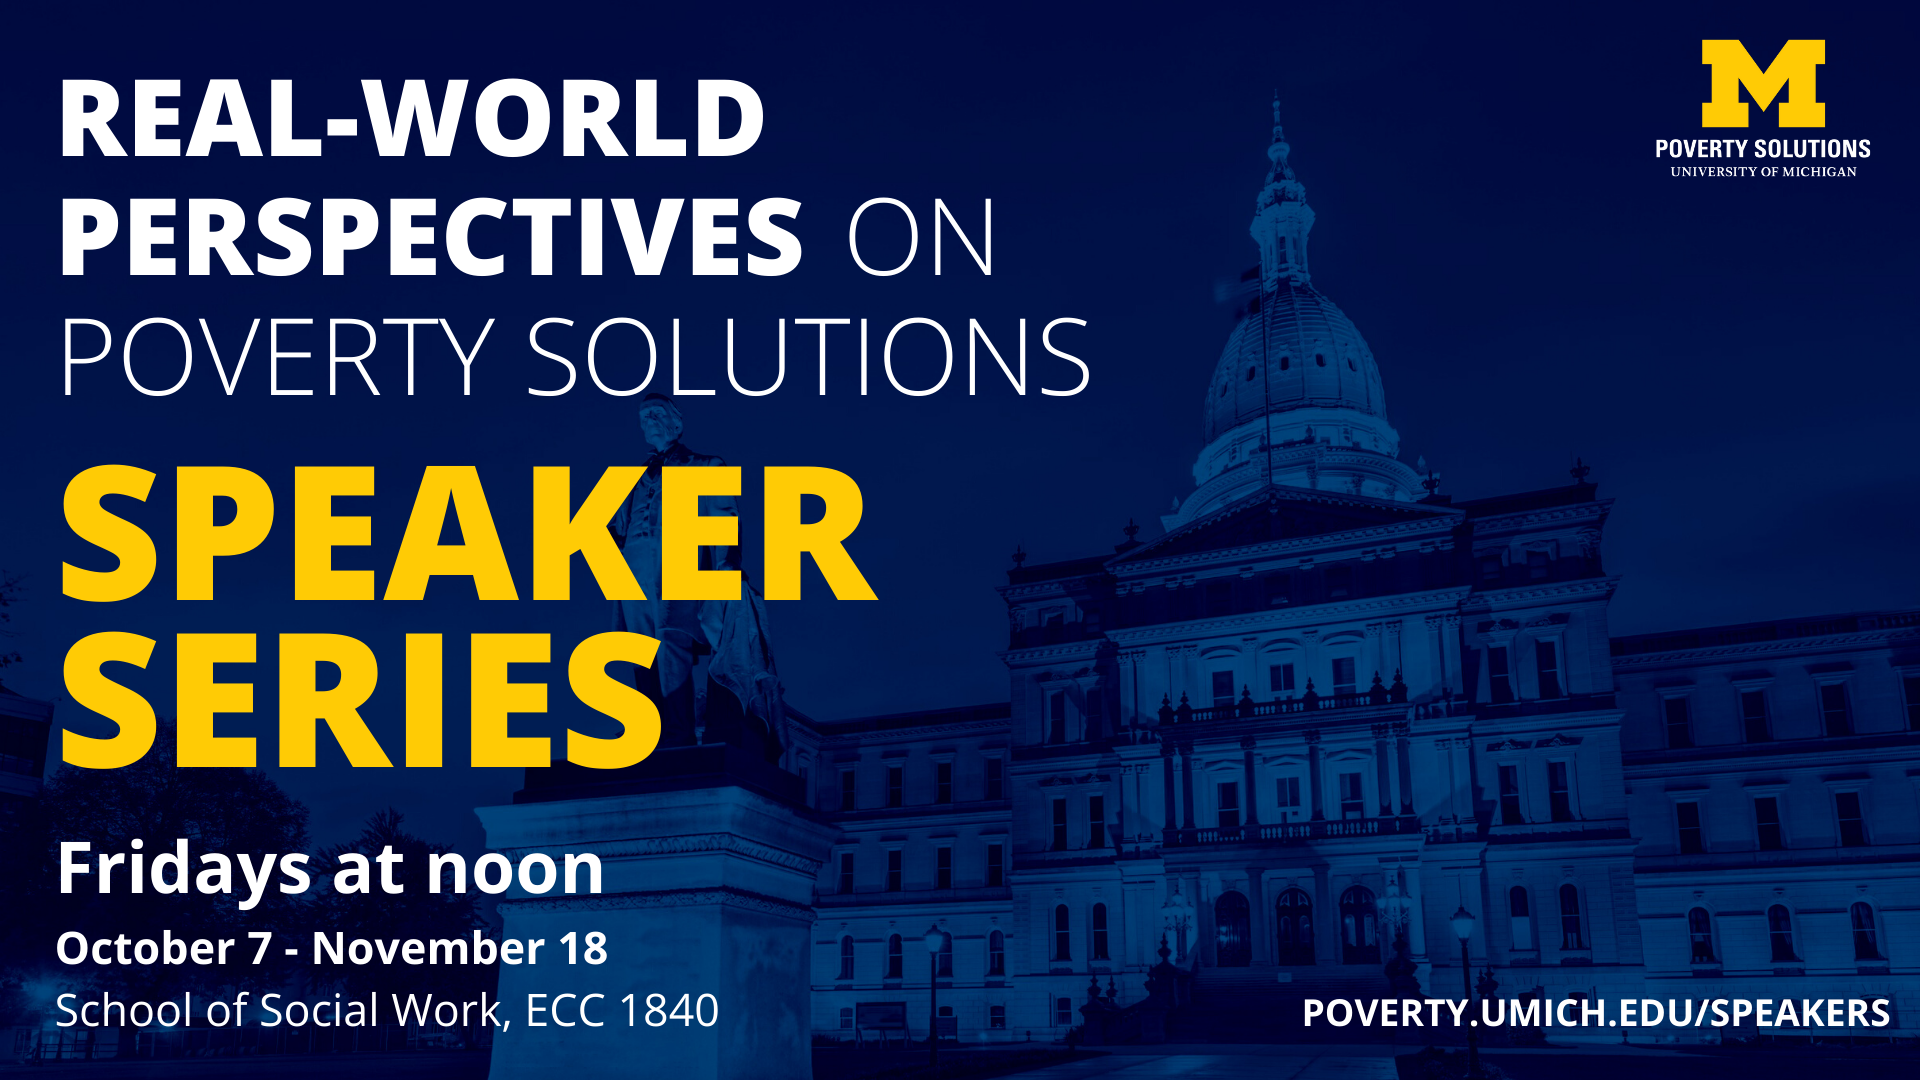 Real-World Perspectives on Poverty Solutions Speaker Series. Oct. 7 through Nov. 18 at noon. School of Social Work, ECC 1840. Hosted by the University of Michigan Poverty Solutions